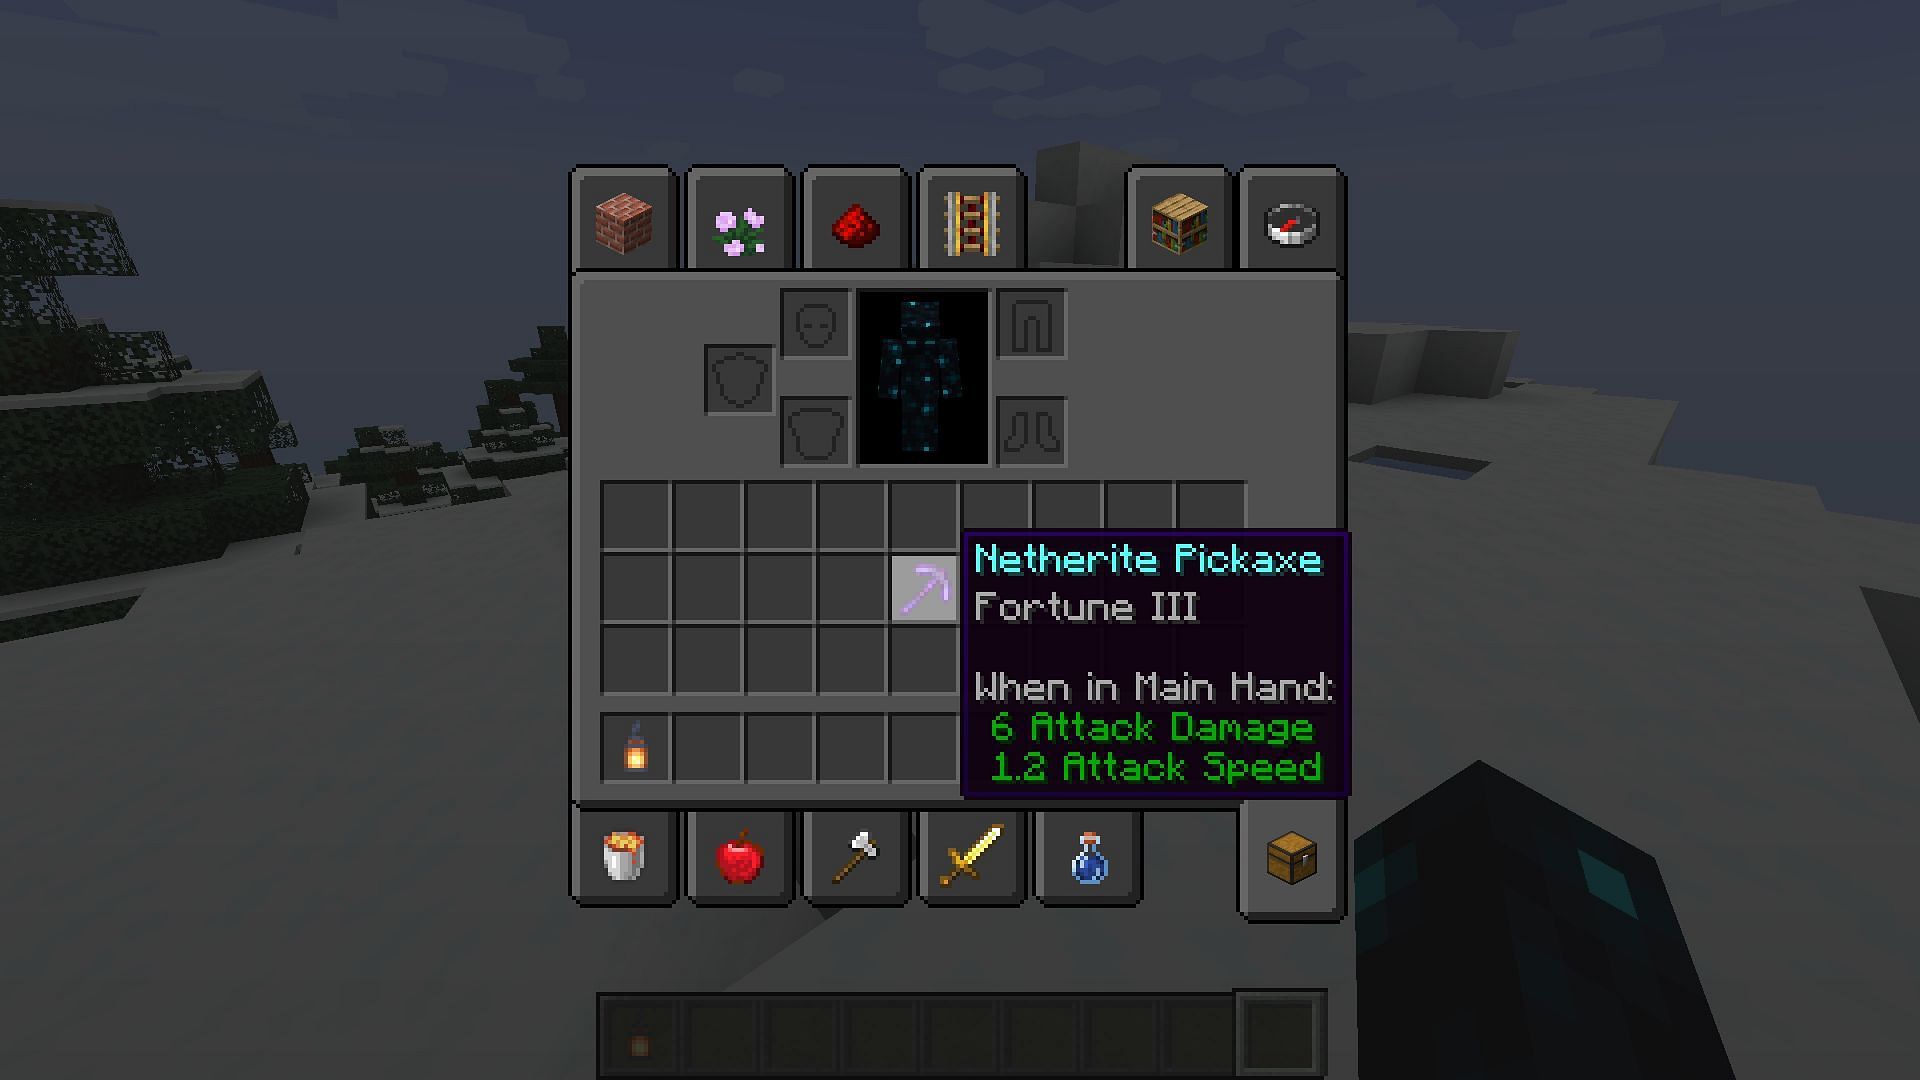 Pickaxe with fortune enchantment will yield more diamonds from a single ore block in Minecraft (Image via Mojang)